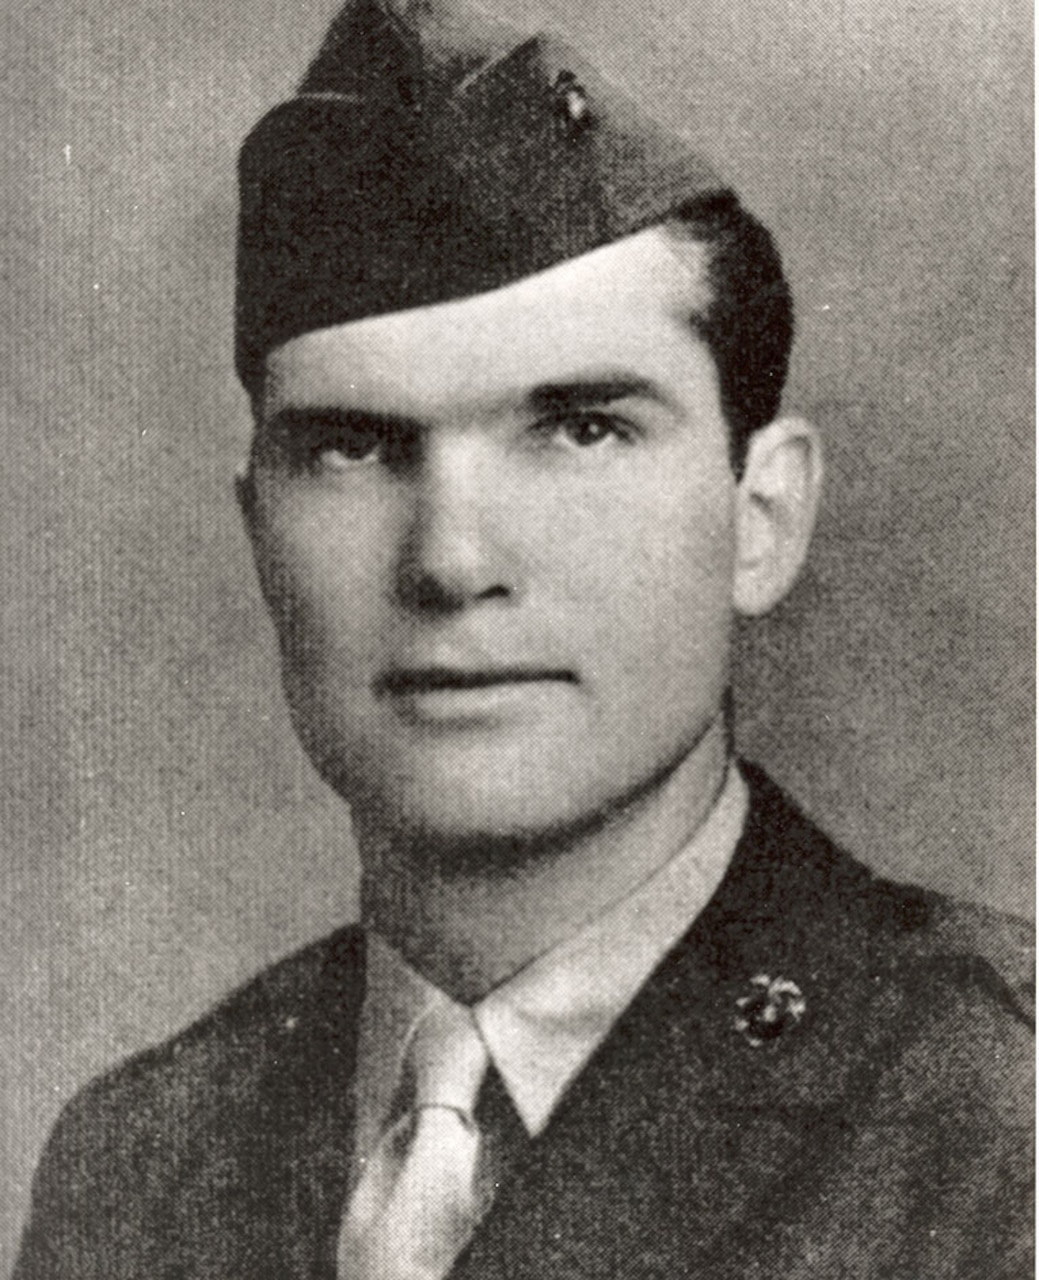 A serious looking man in a cap and uniform looks at the camera.